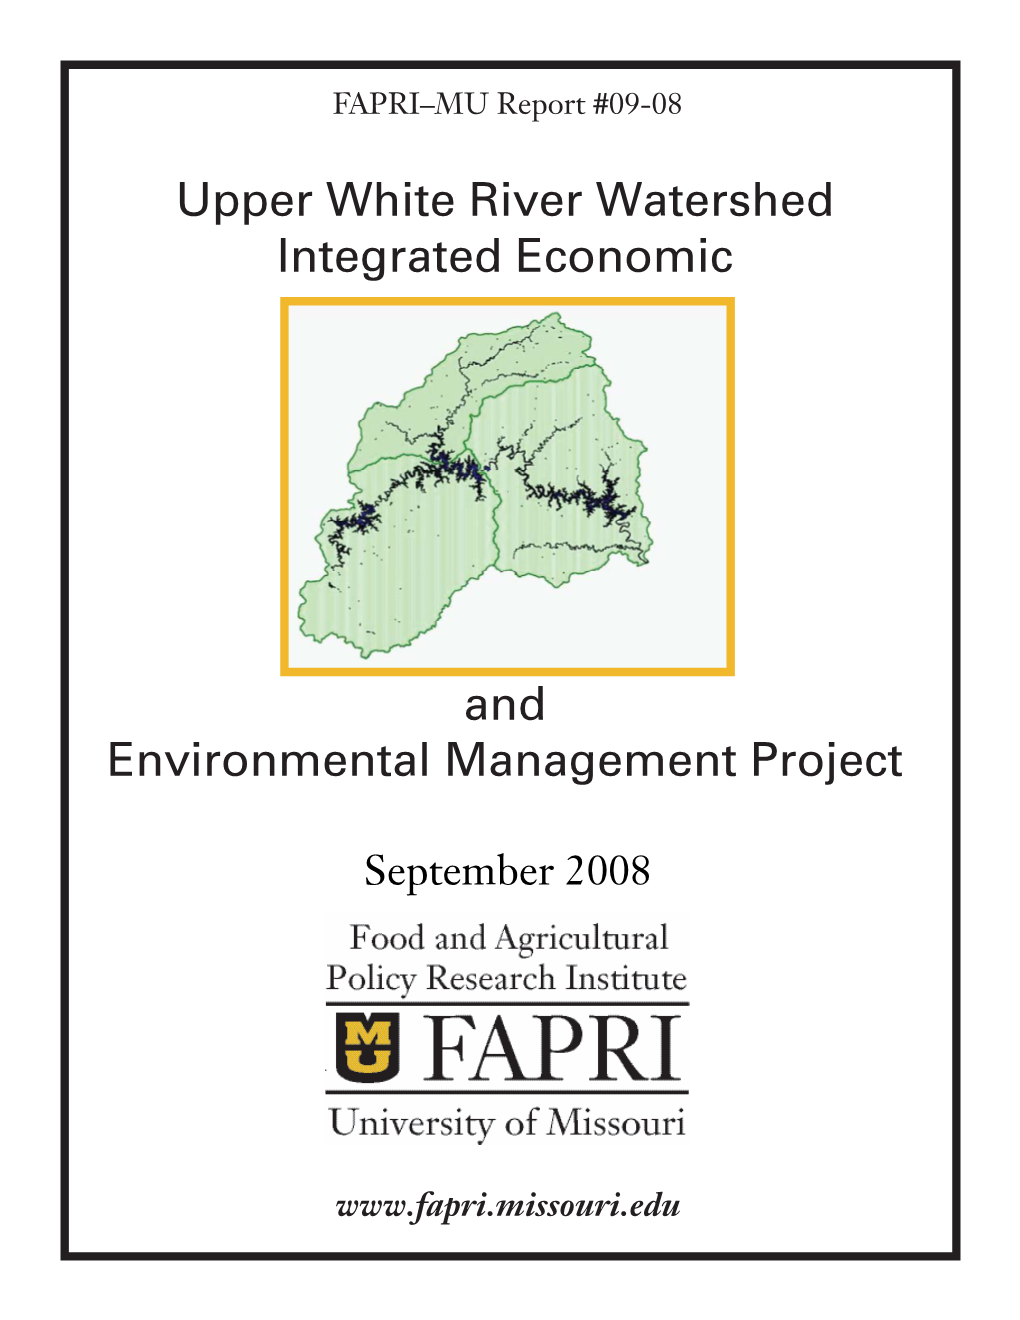 Upper White River Watershed Integrated Economic and Environmental Management Project Related Publications